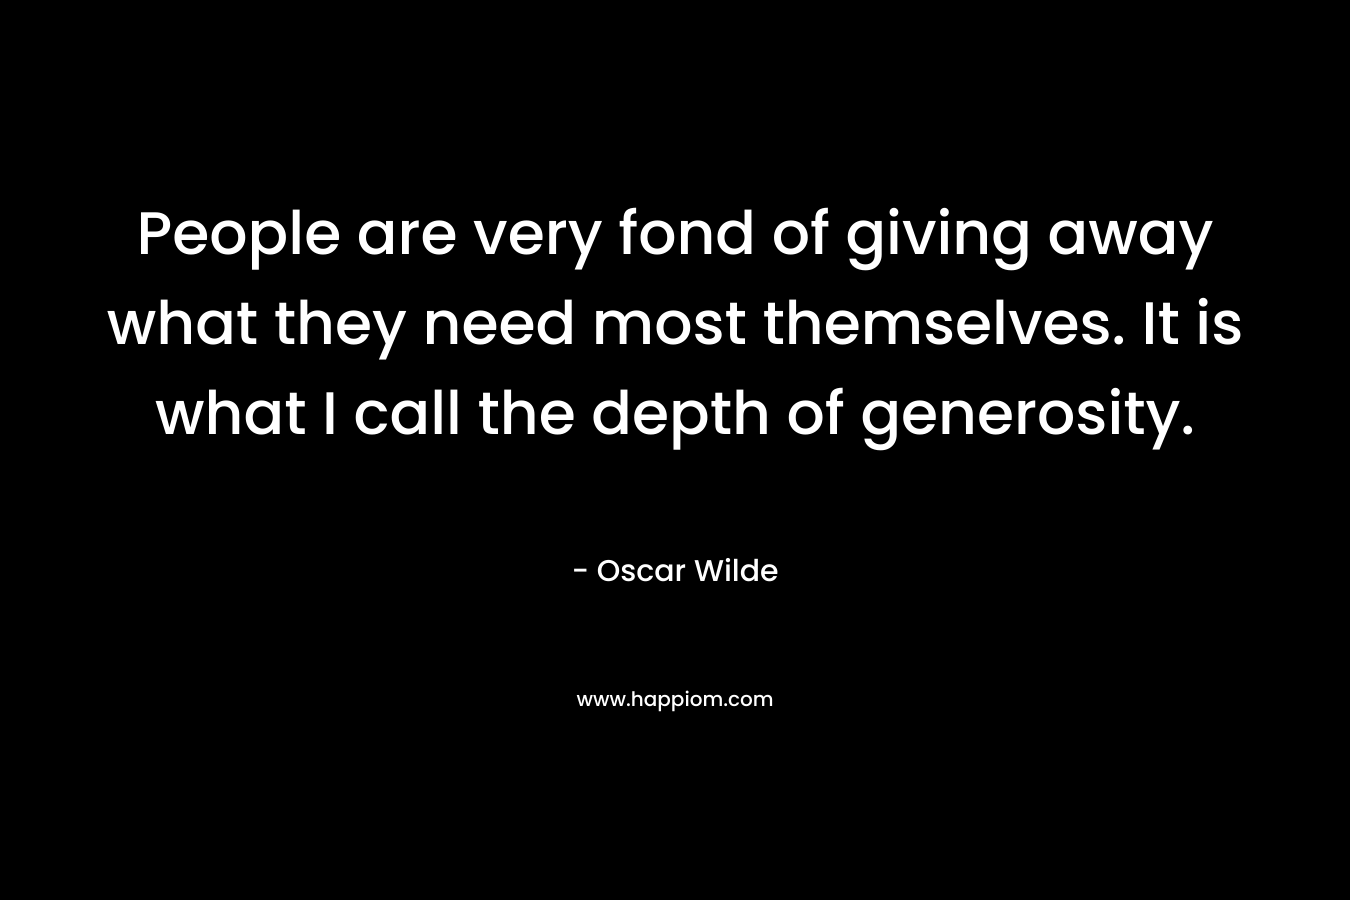 People are very fond of giving away what they need most themselves. It is what I call the depth of generosity. – Oscar Wilde